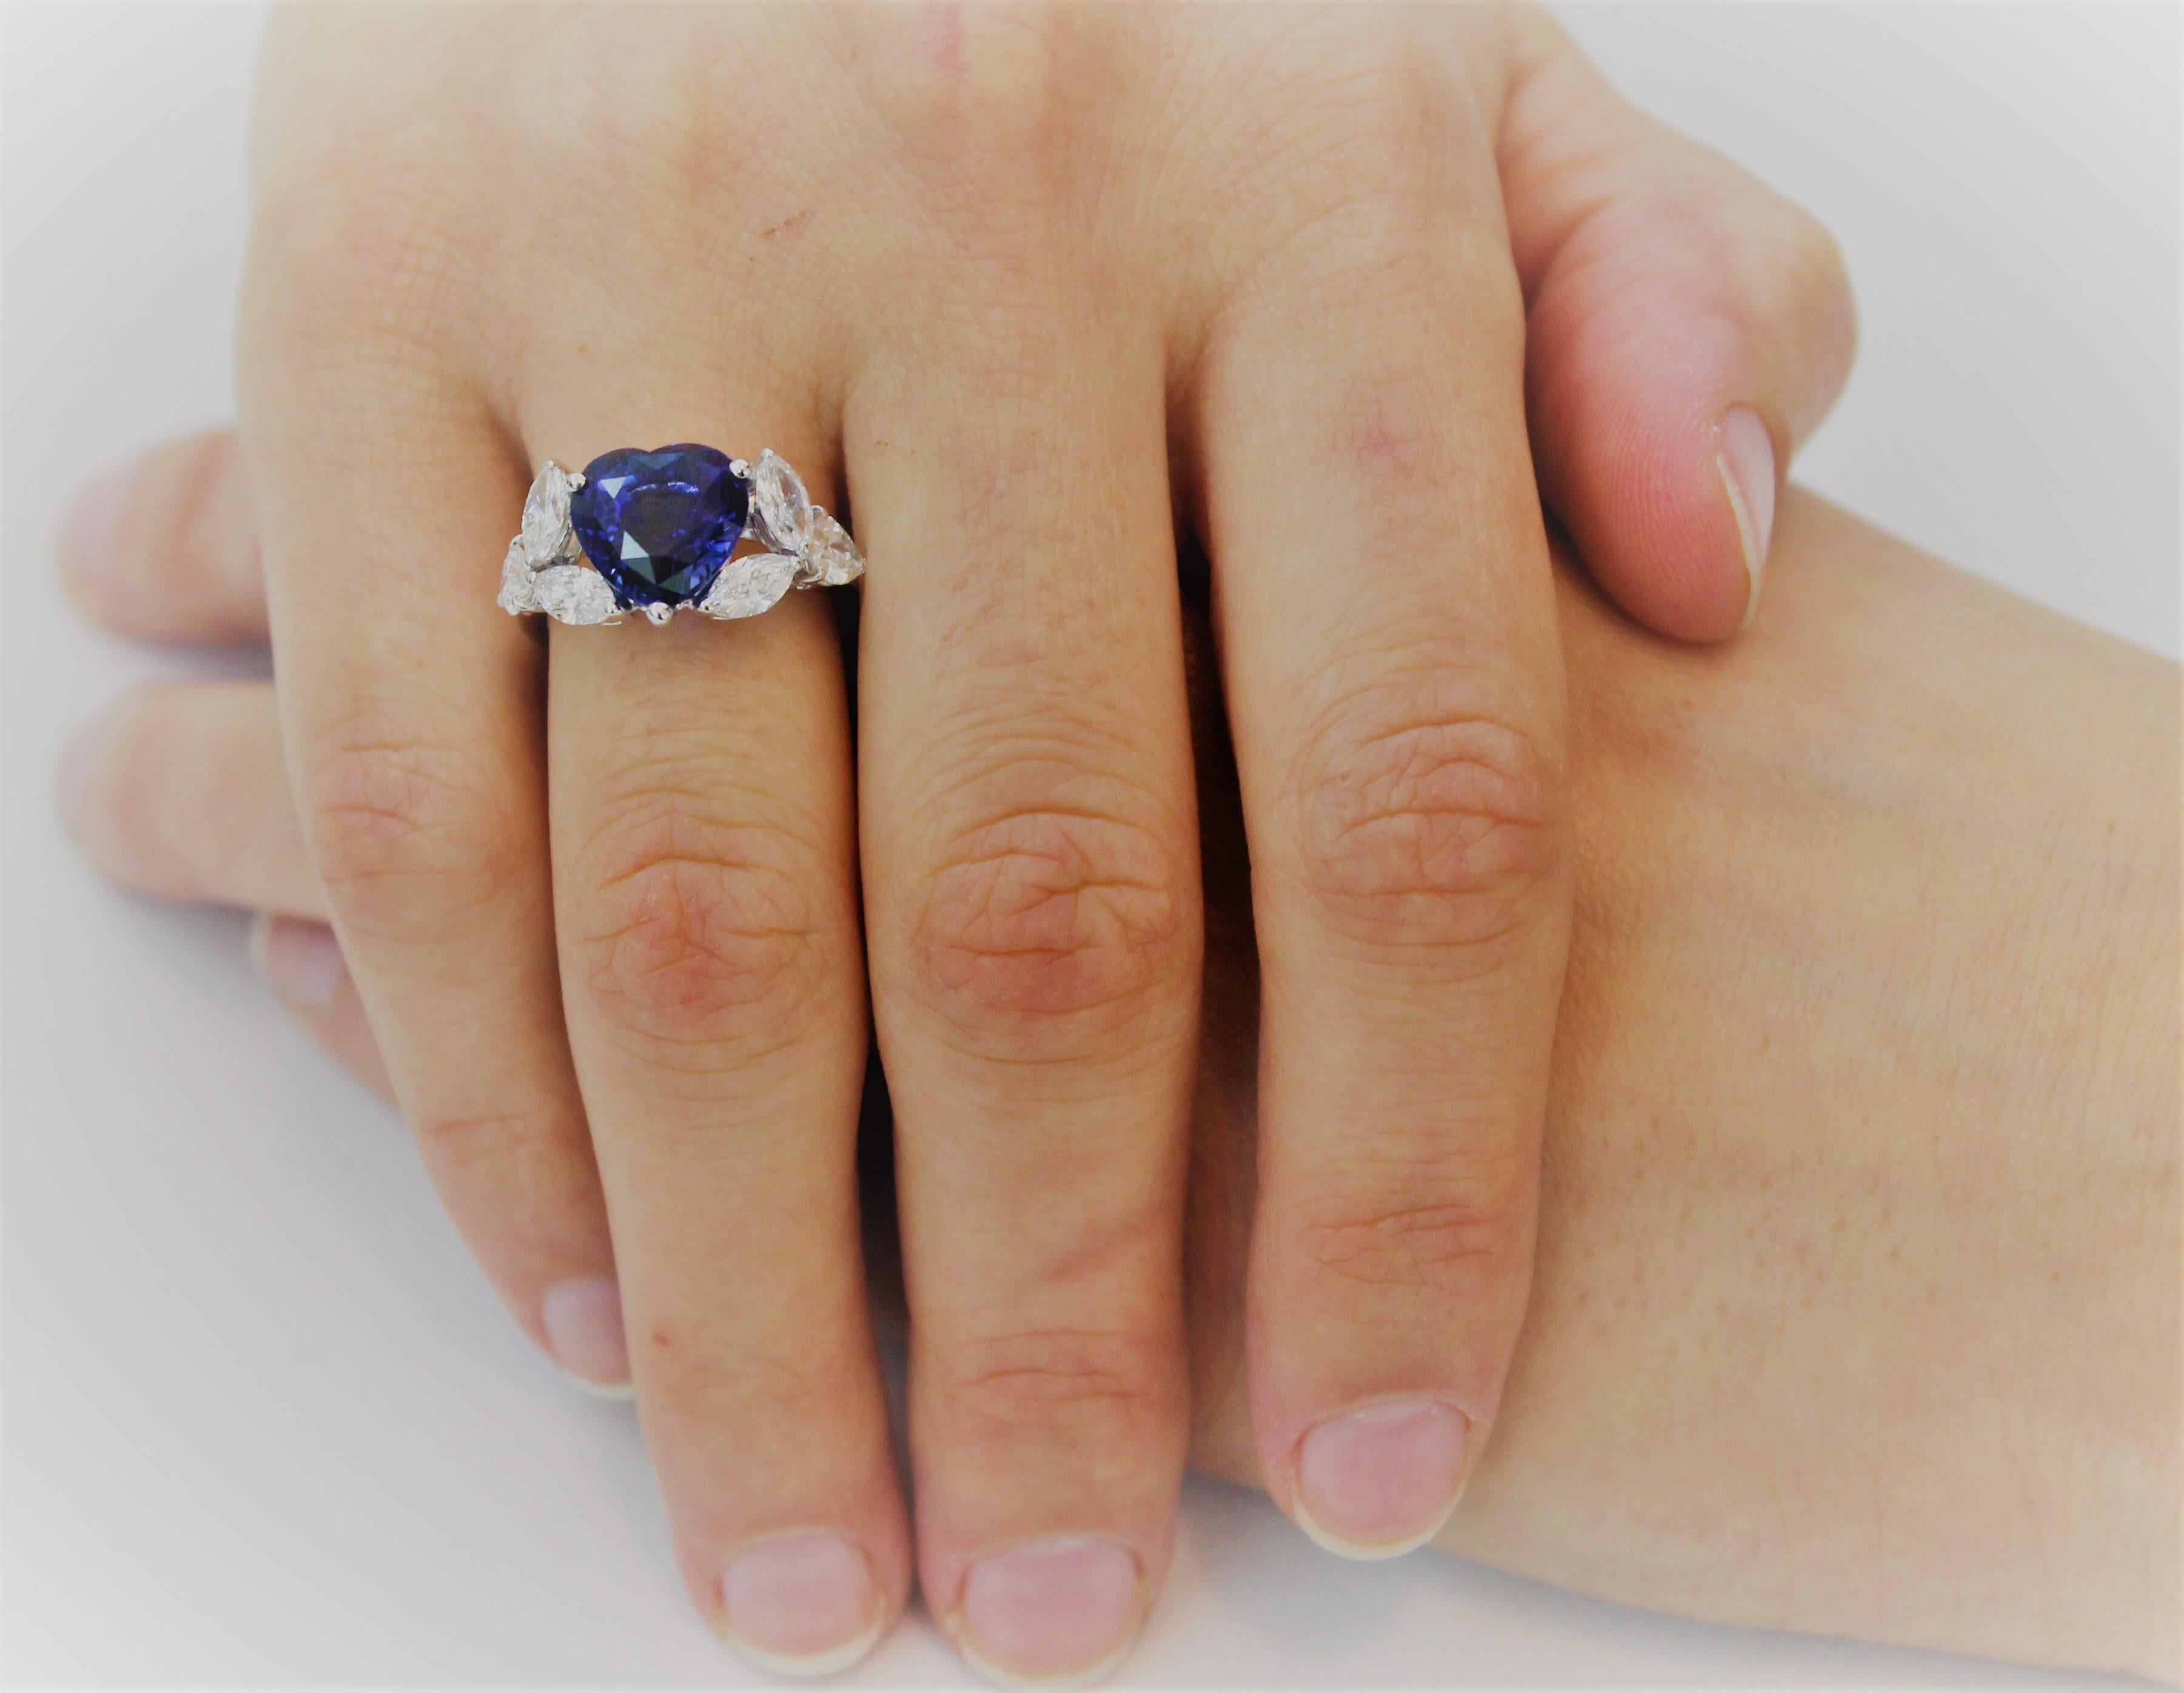 Romantic Hand-Made Cocktail Ring featuring a 5.95 Carat Blue Heart Shape Sapphire embraced by 6 White Marquise Diamonds for 1.63 Carat total.